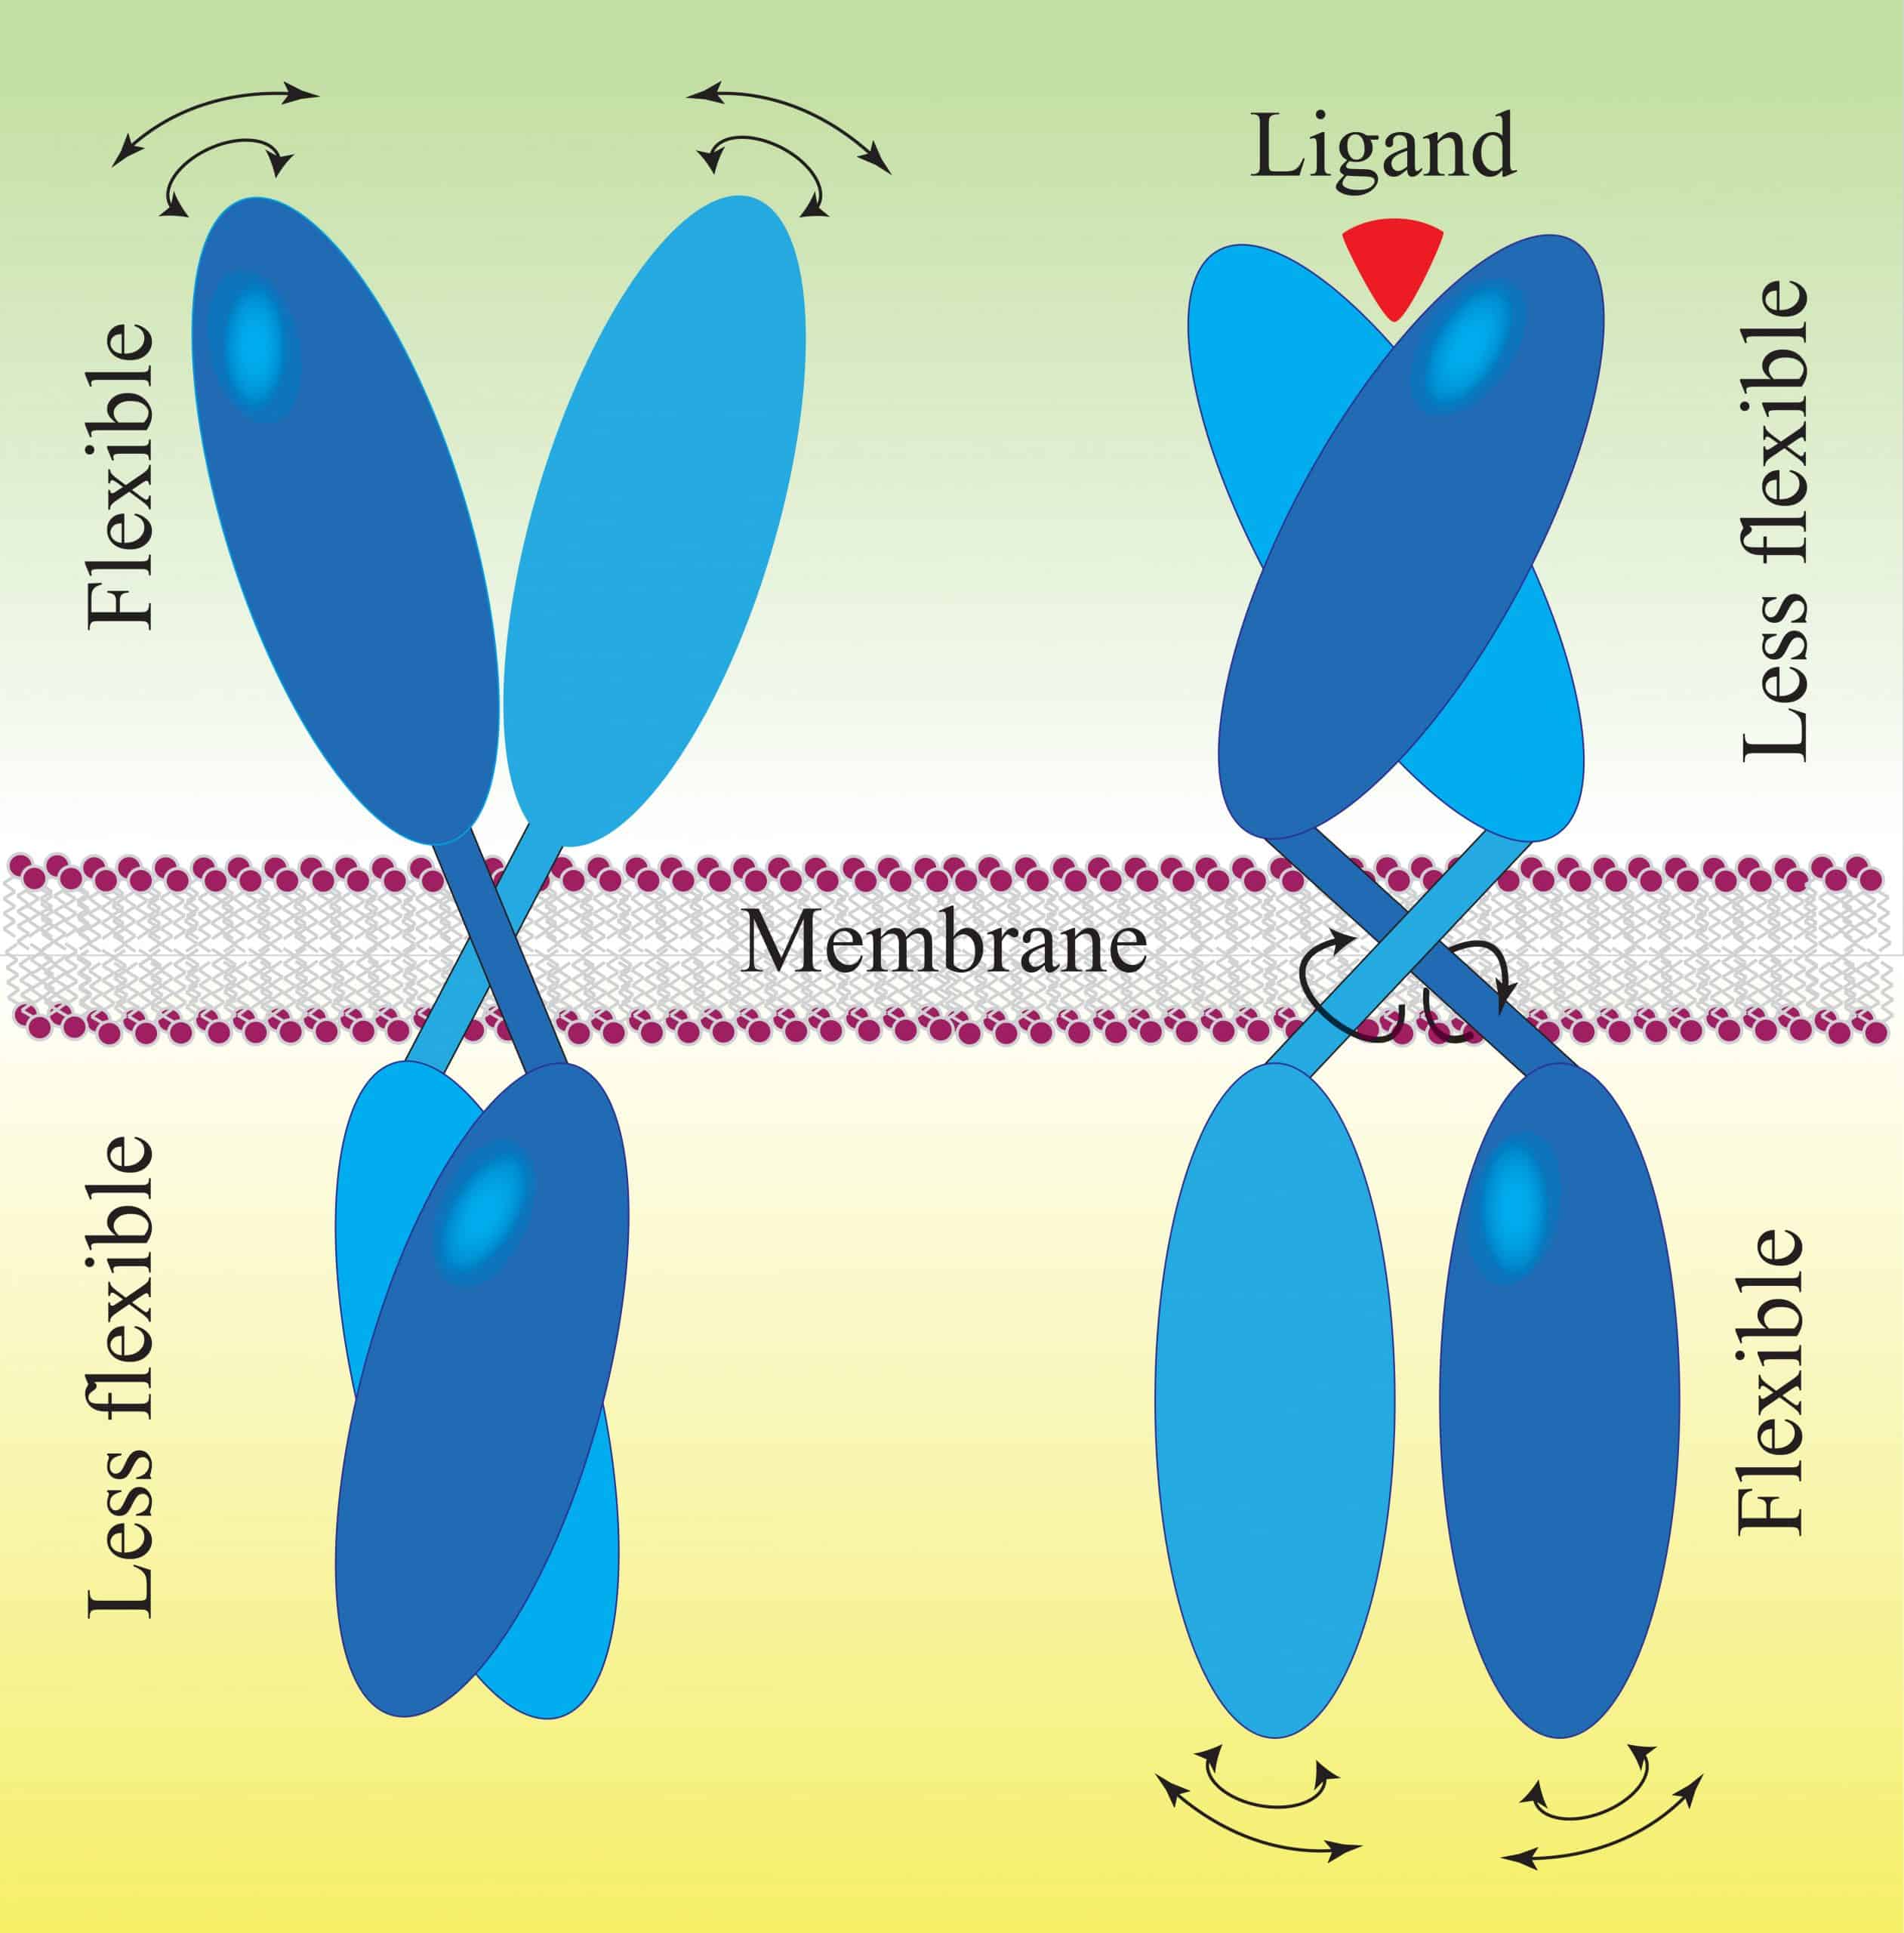 A new model for transmembrane cell